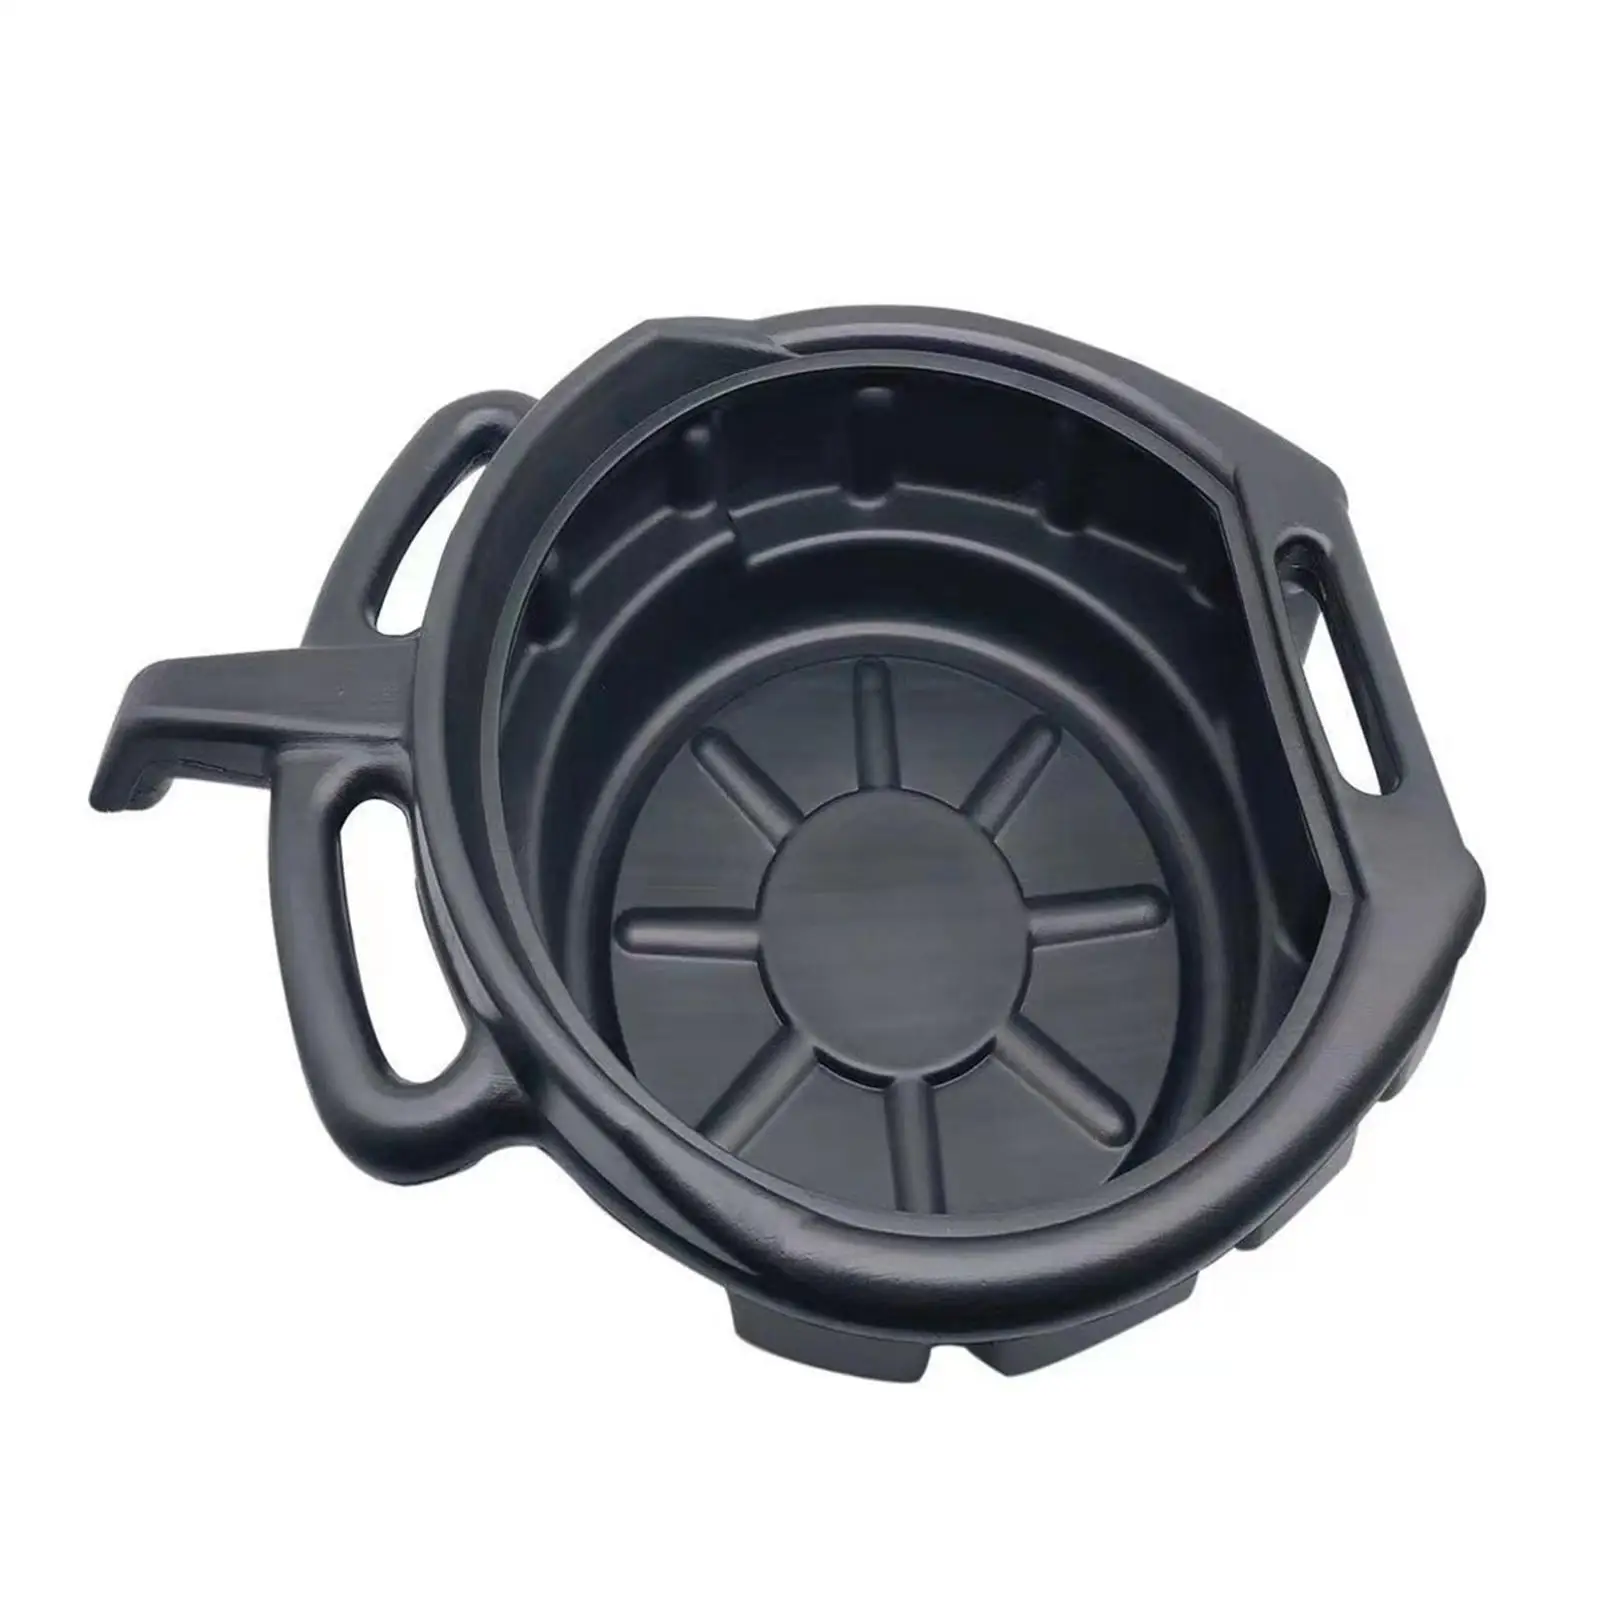 Oil Drain Can Portable Easy to Clean Multifunction Storage Drain Pan for Garage Car Fuel Fluid Garage Tool Vehicle